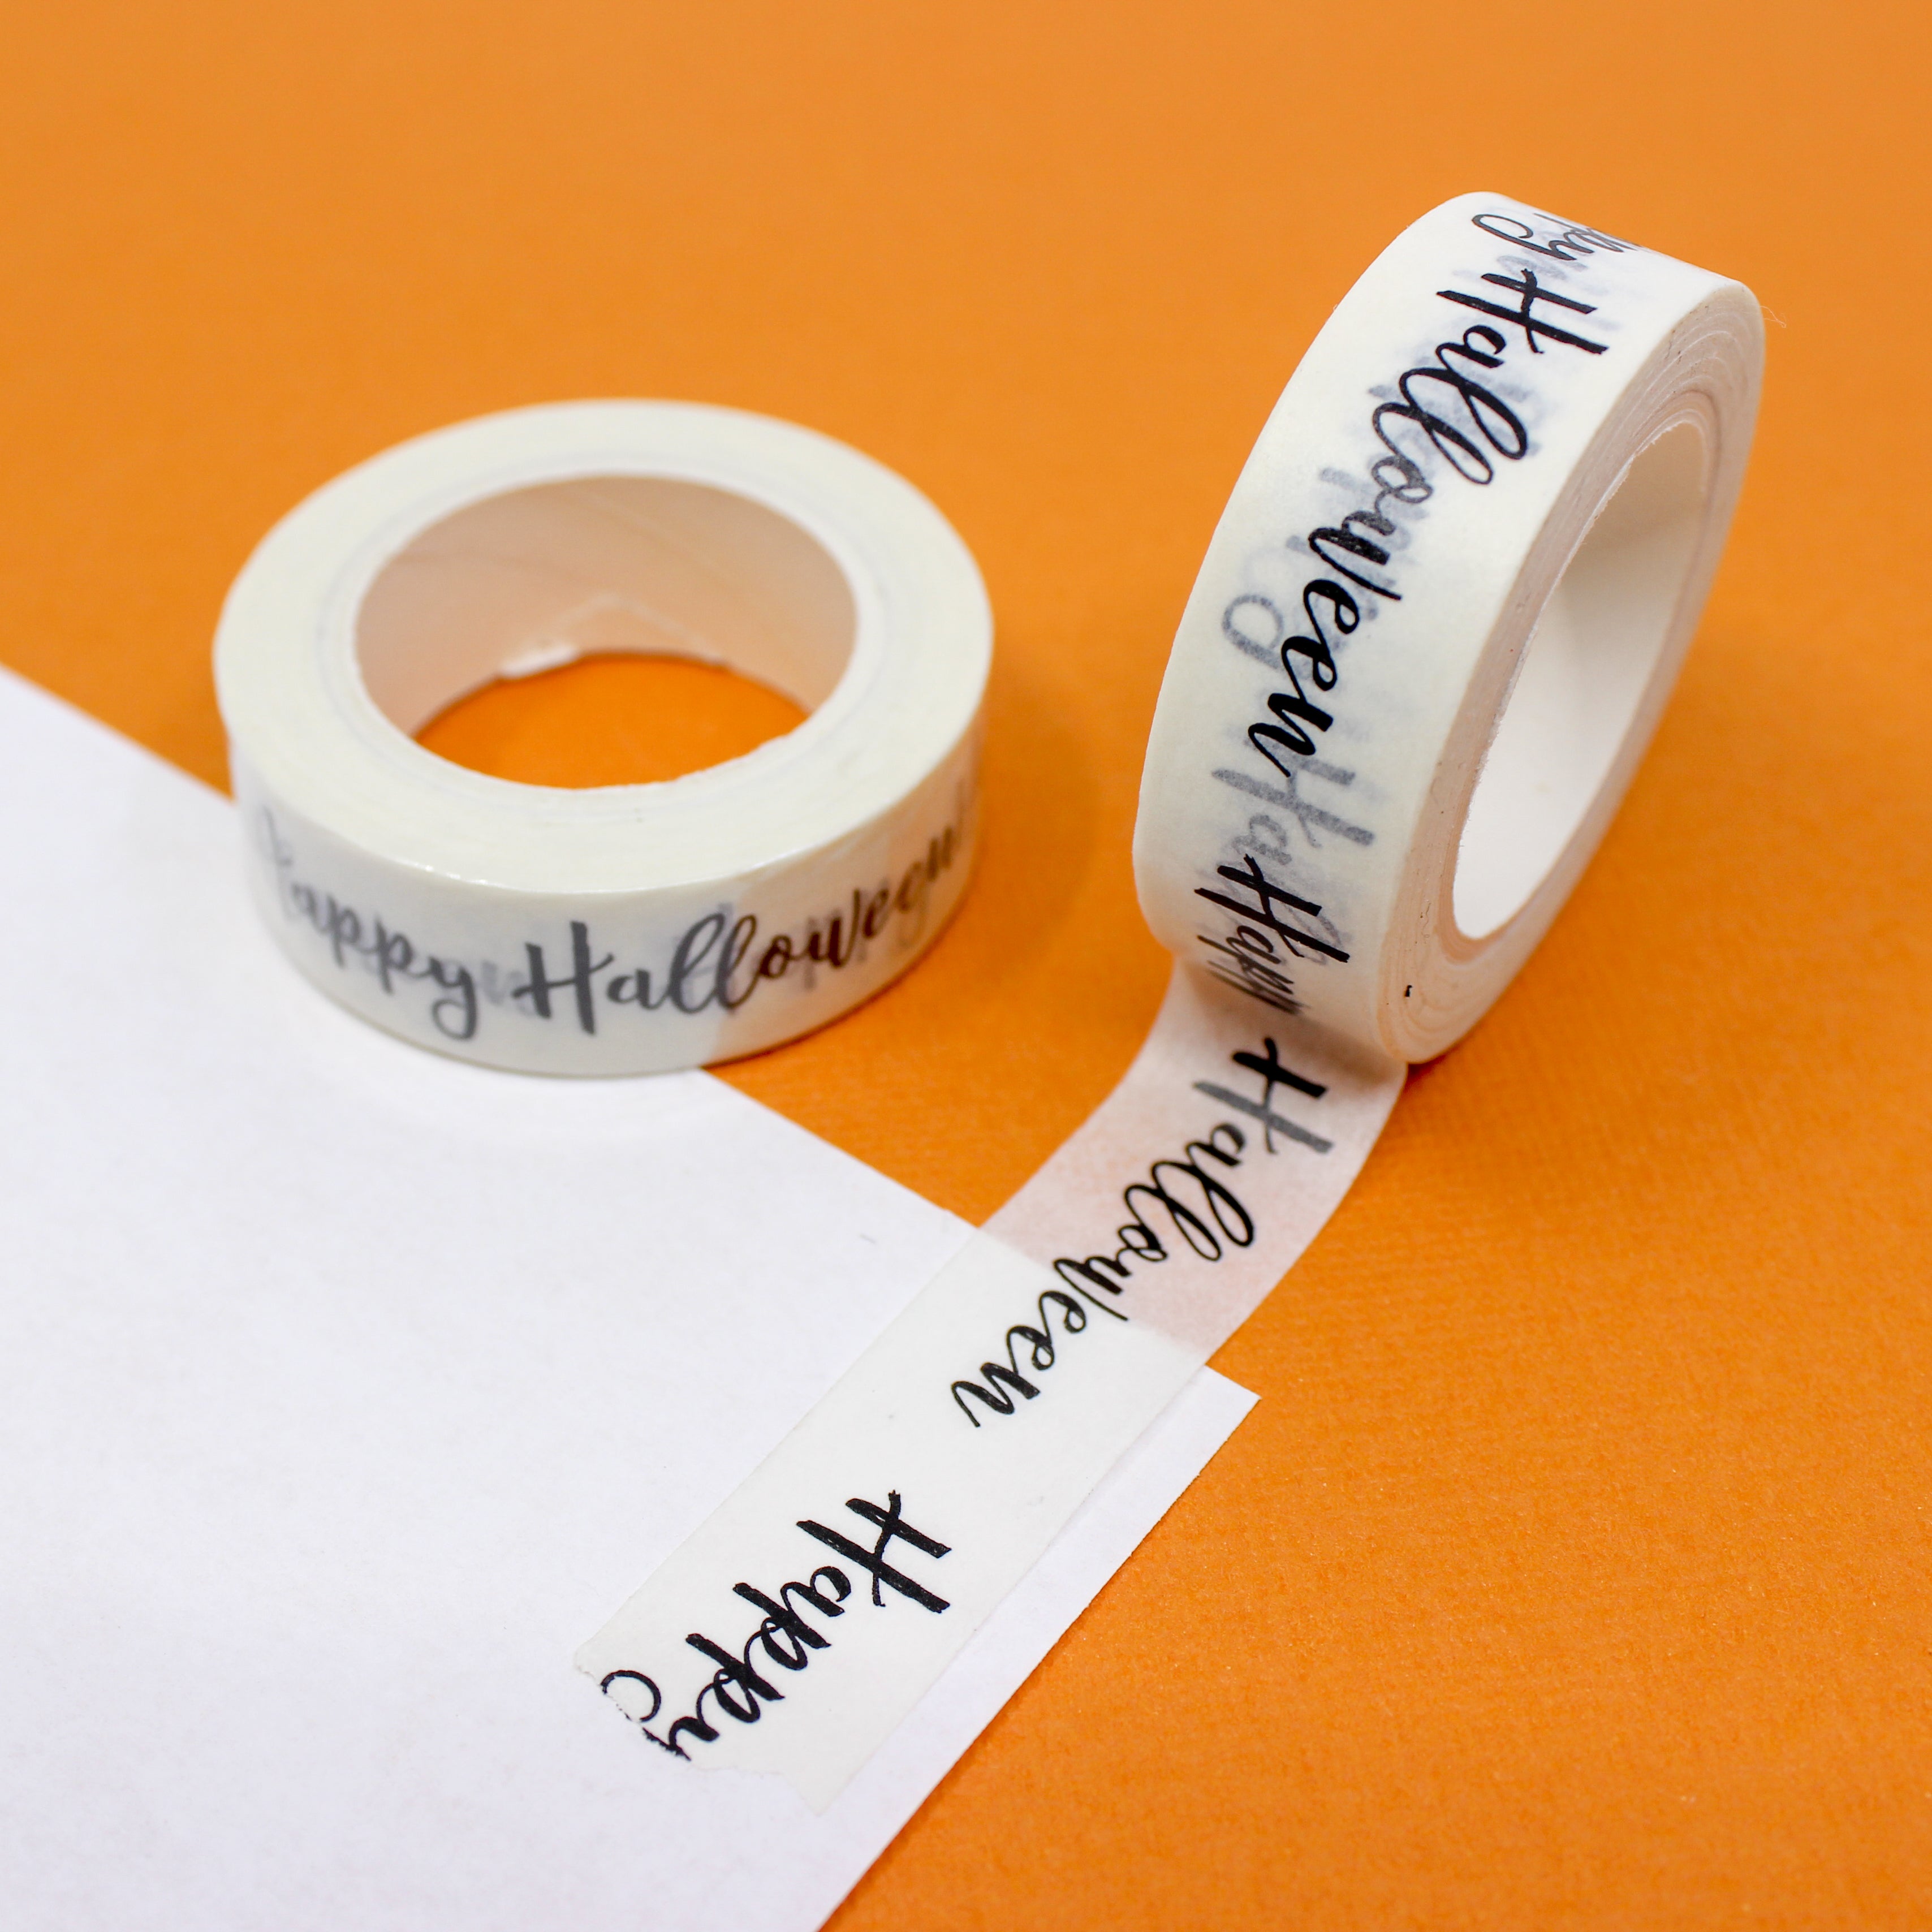 This is Happy Halloween cursive text washi tape from BBB Supplies Craft Shop